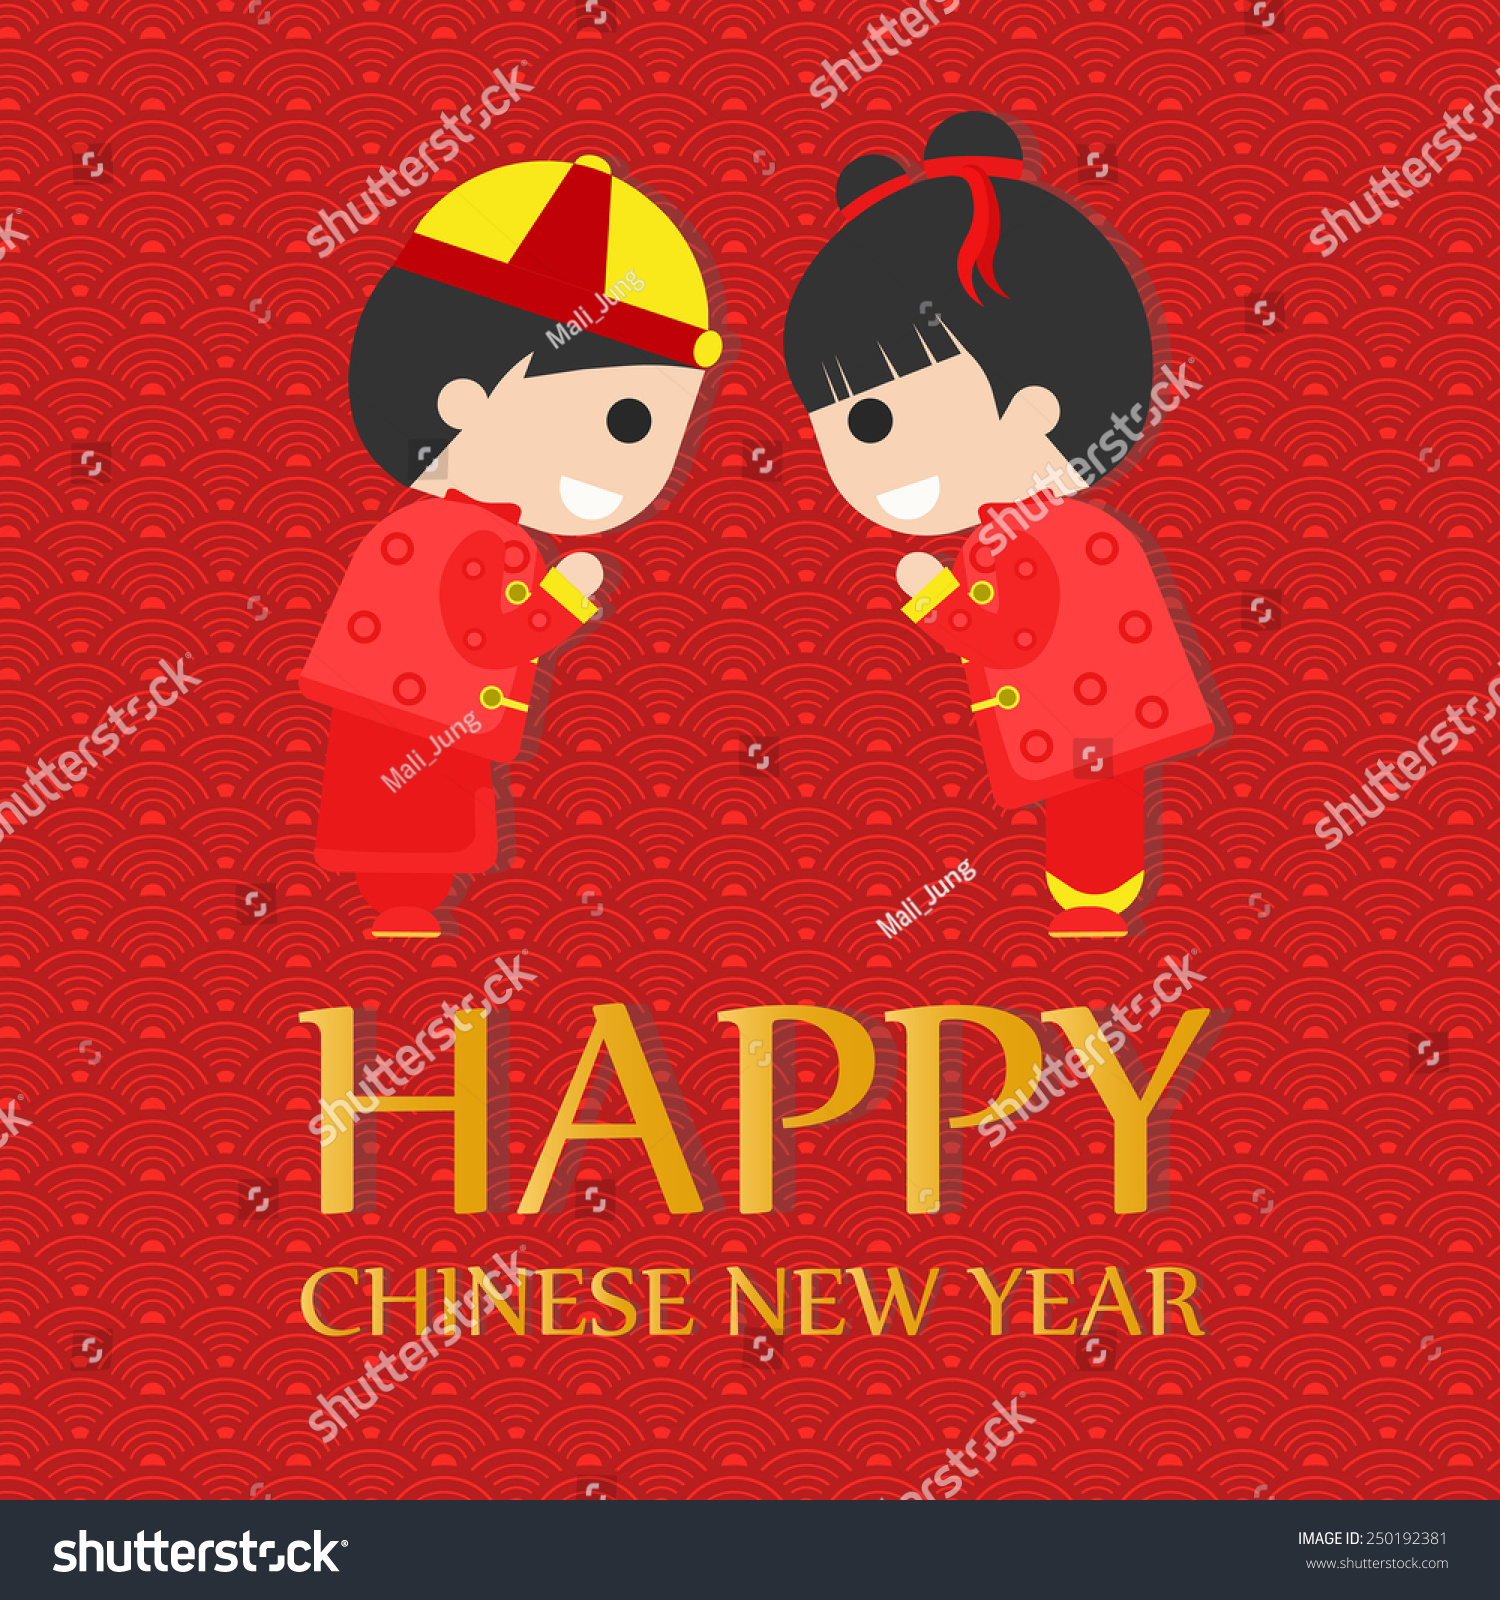 Happy Chinese New Year Greetings ,children,vector illustration #250192381